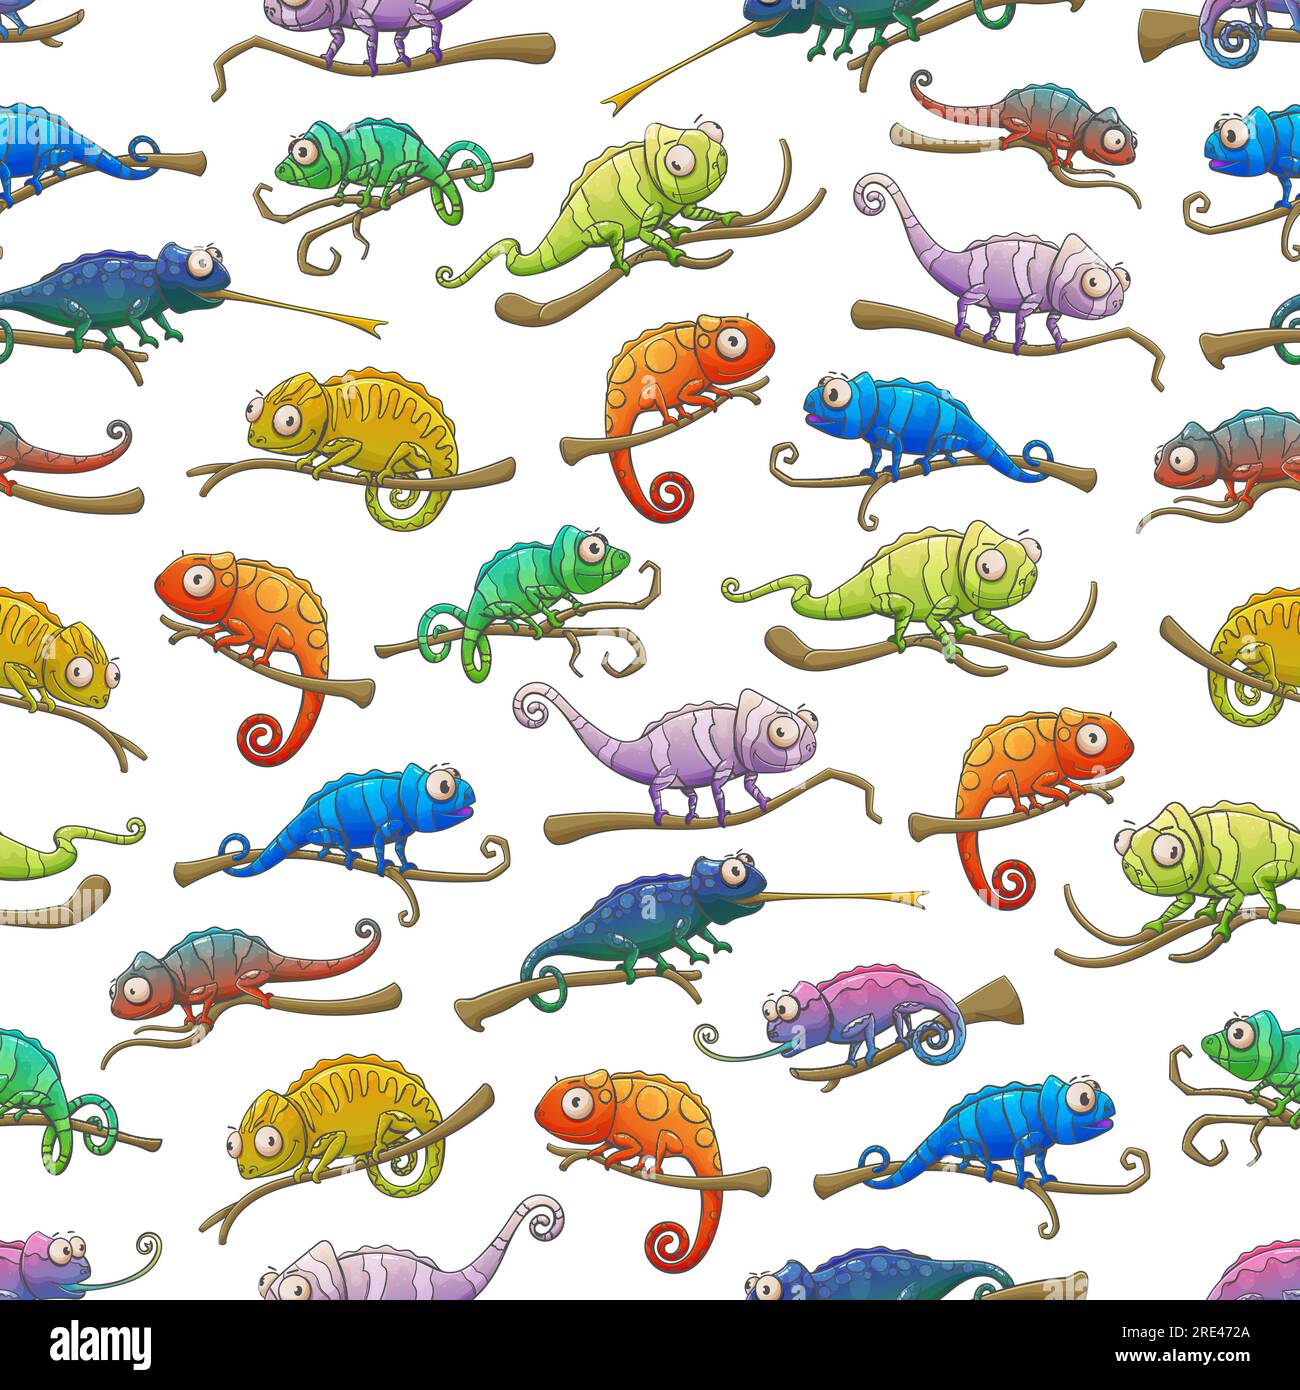 Chameleons seamless pattern of exotic lizard animals. Vector background with colorful chameleon reptiles sitting on branches with camouflage spots and stripes, long tails and tongues, animal backdrop Stock Vector